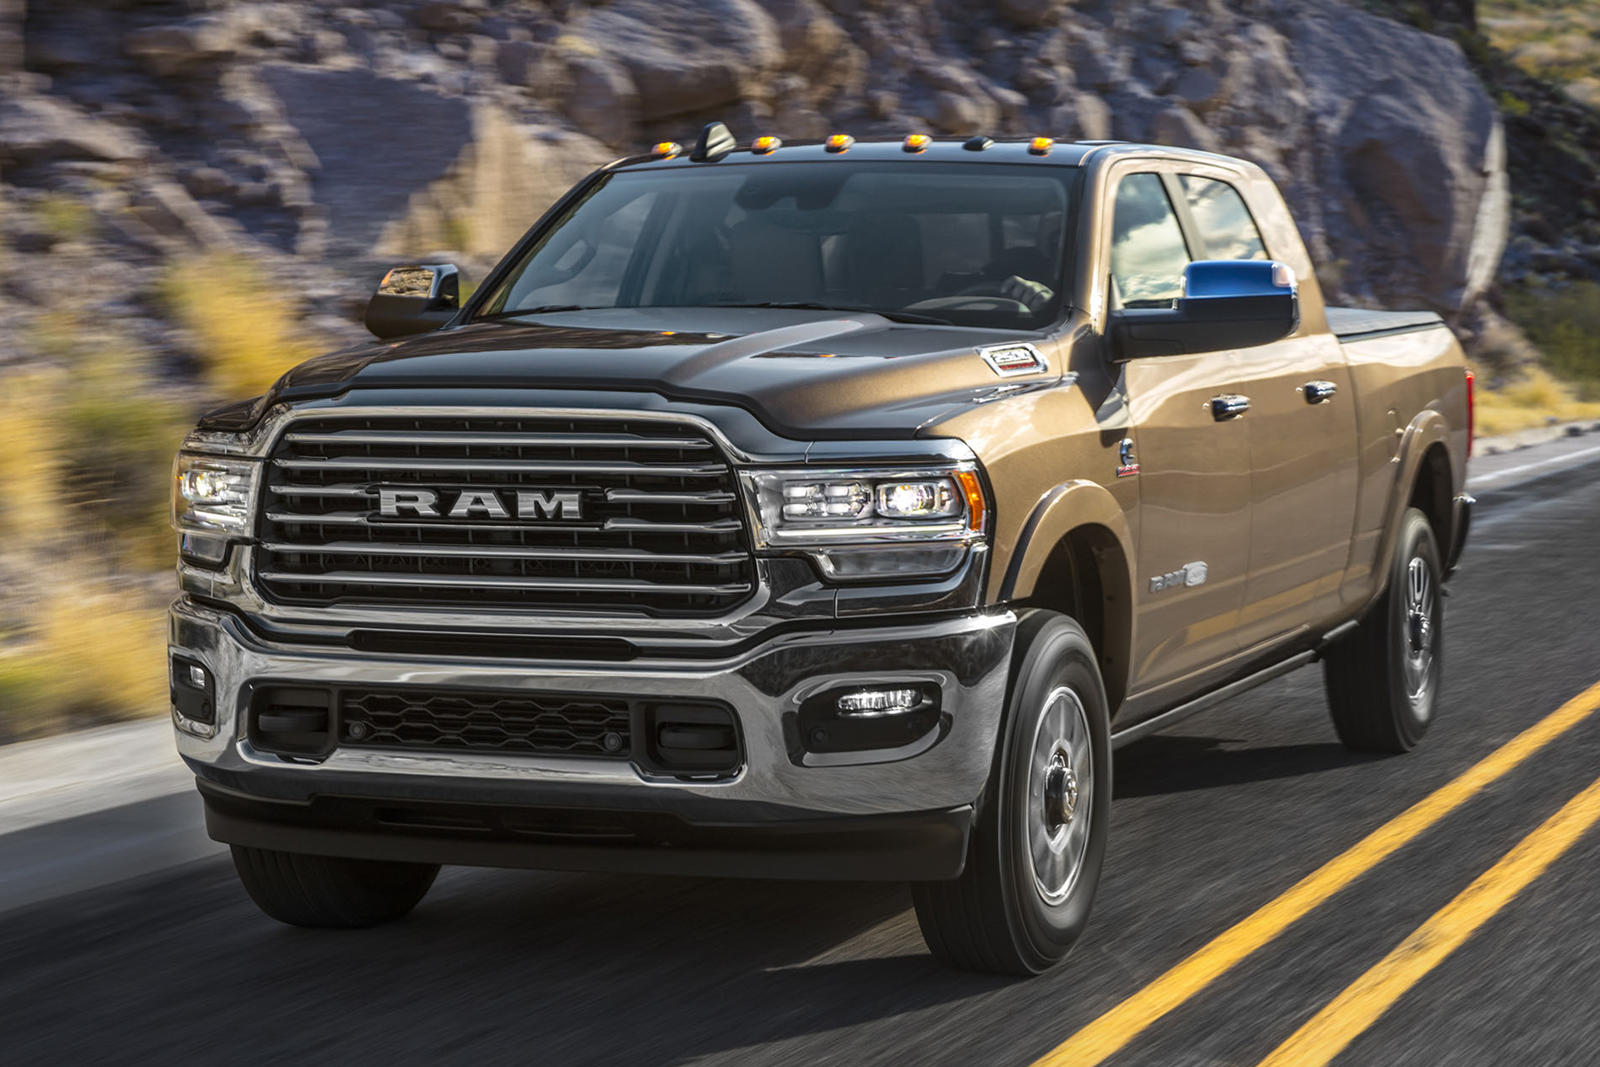 Fiat Chrysler took the wraps off the new heavy-duty Ram 2500 and 3500 picku...